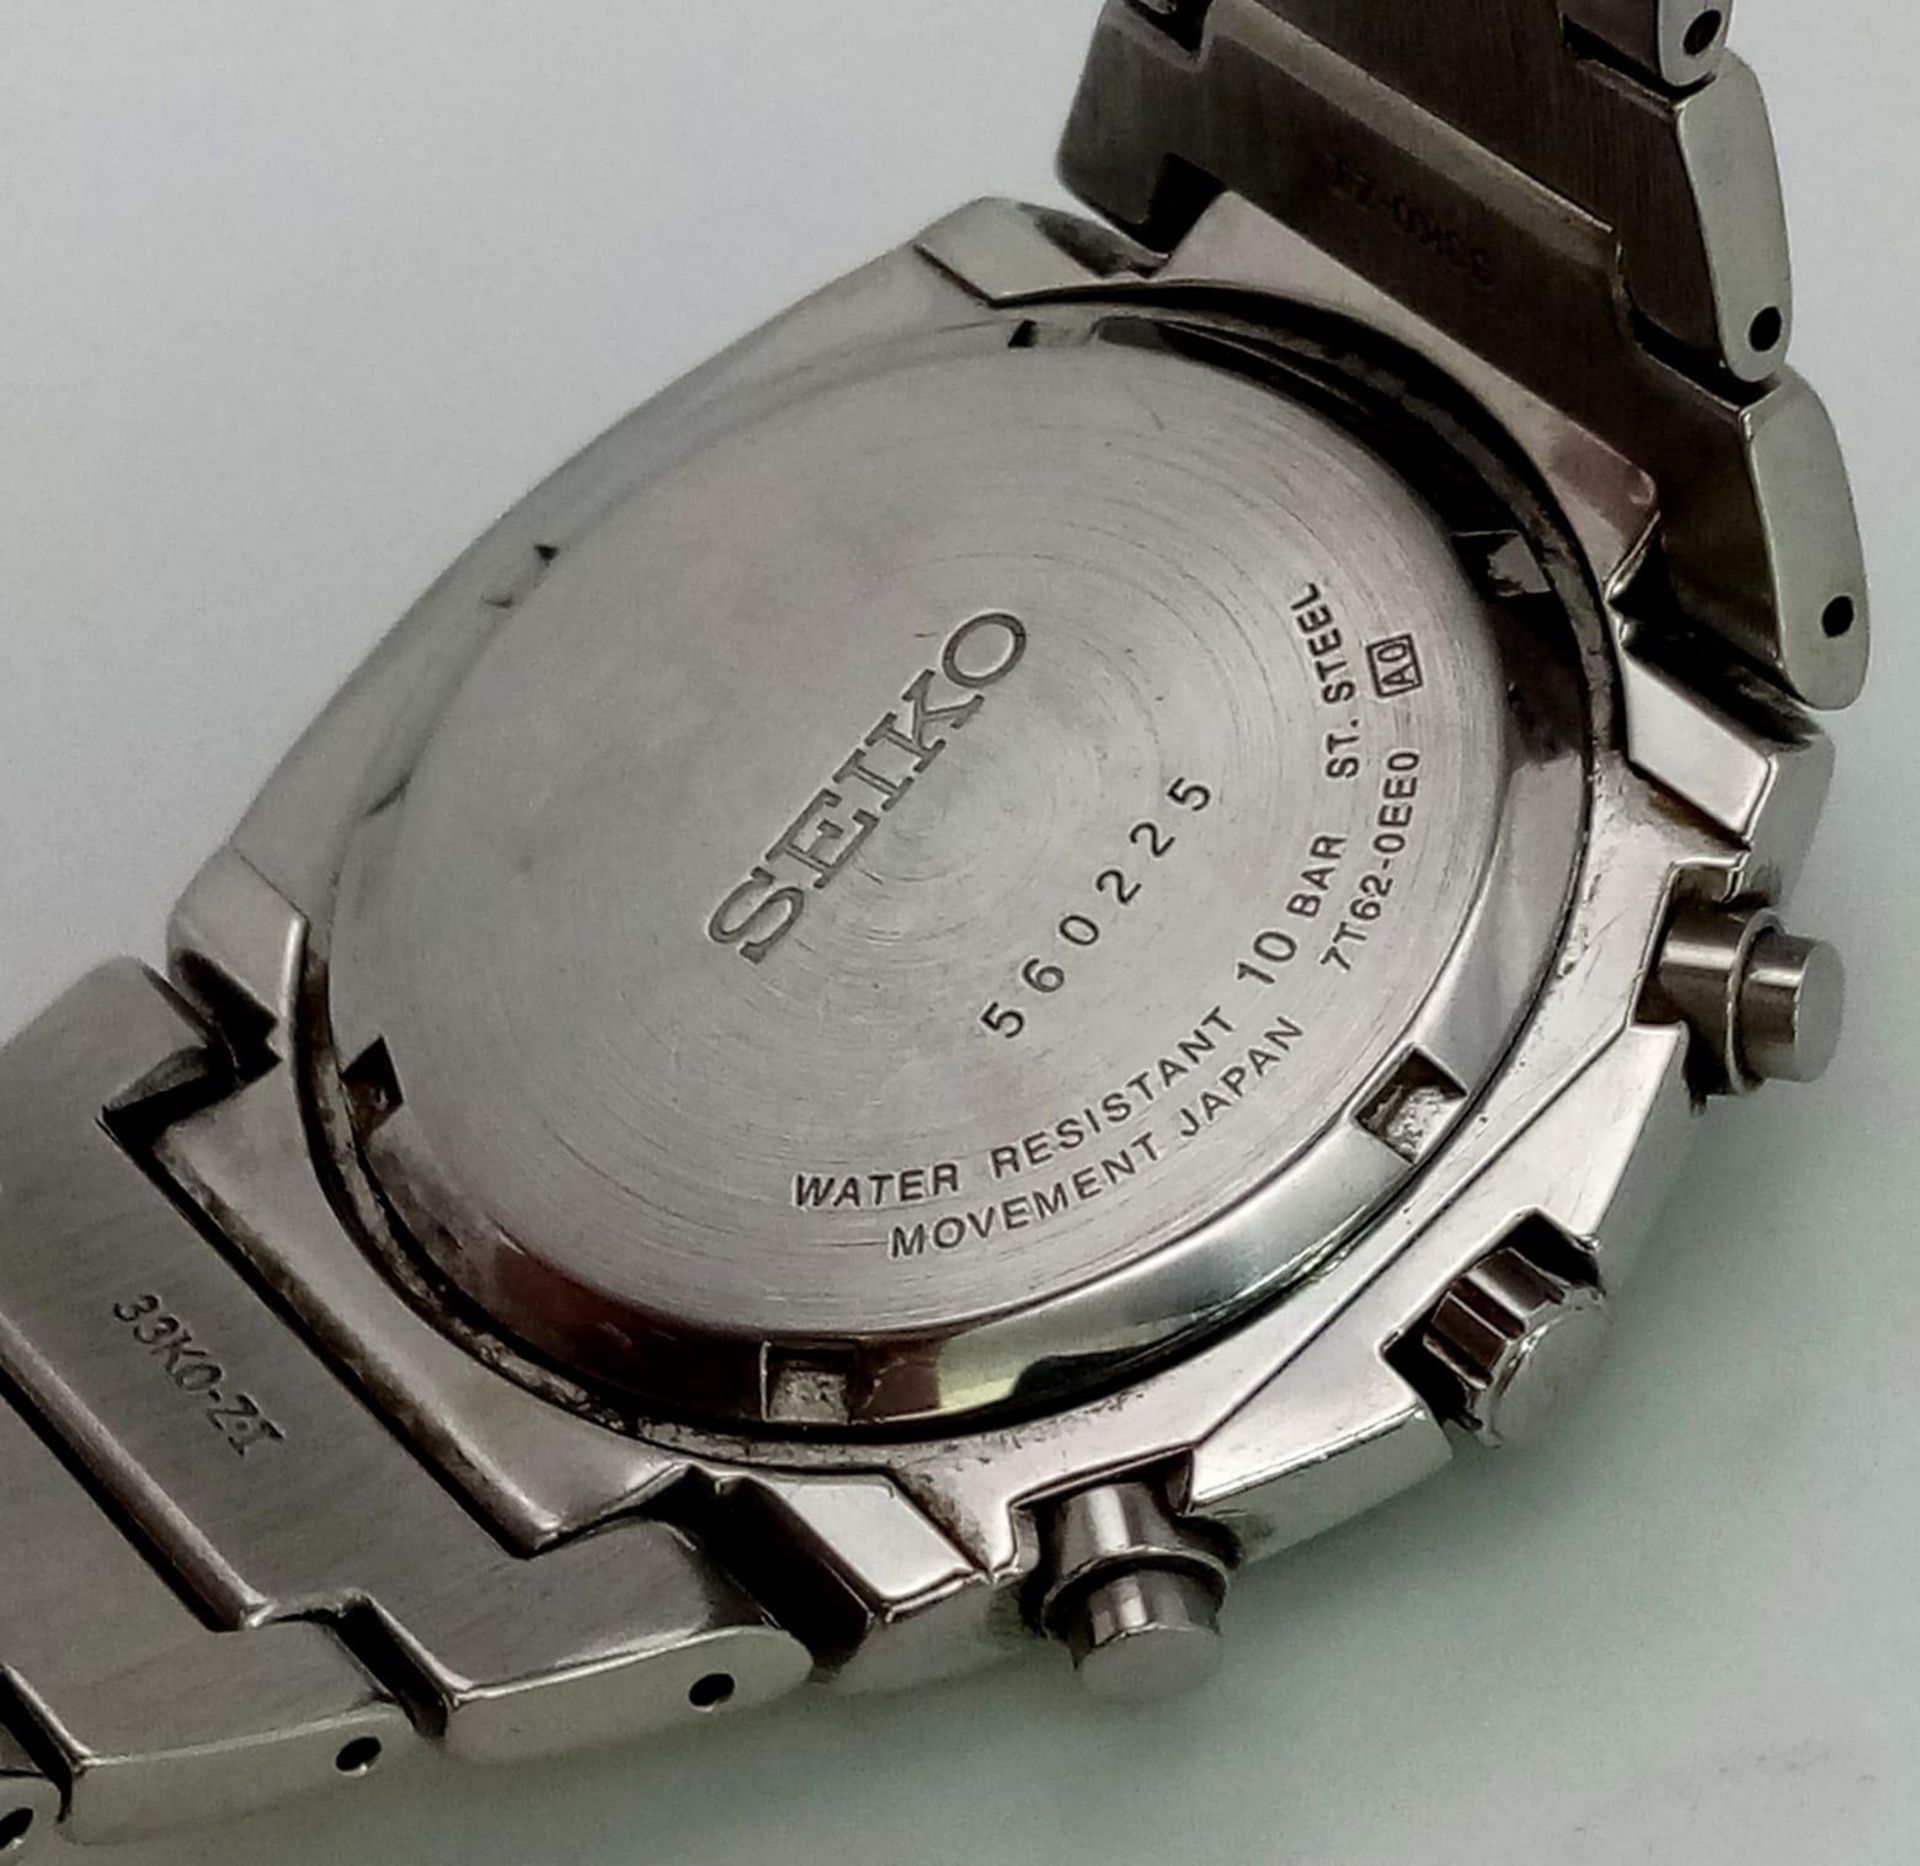 A Seiko Chronograph Quartz Gens Watch. Stainless steel strap and case - 40mm. Silver tone dial - Image 10 of 13